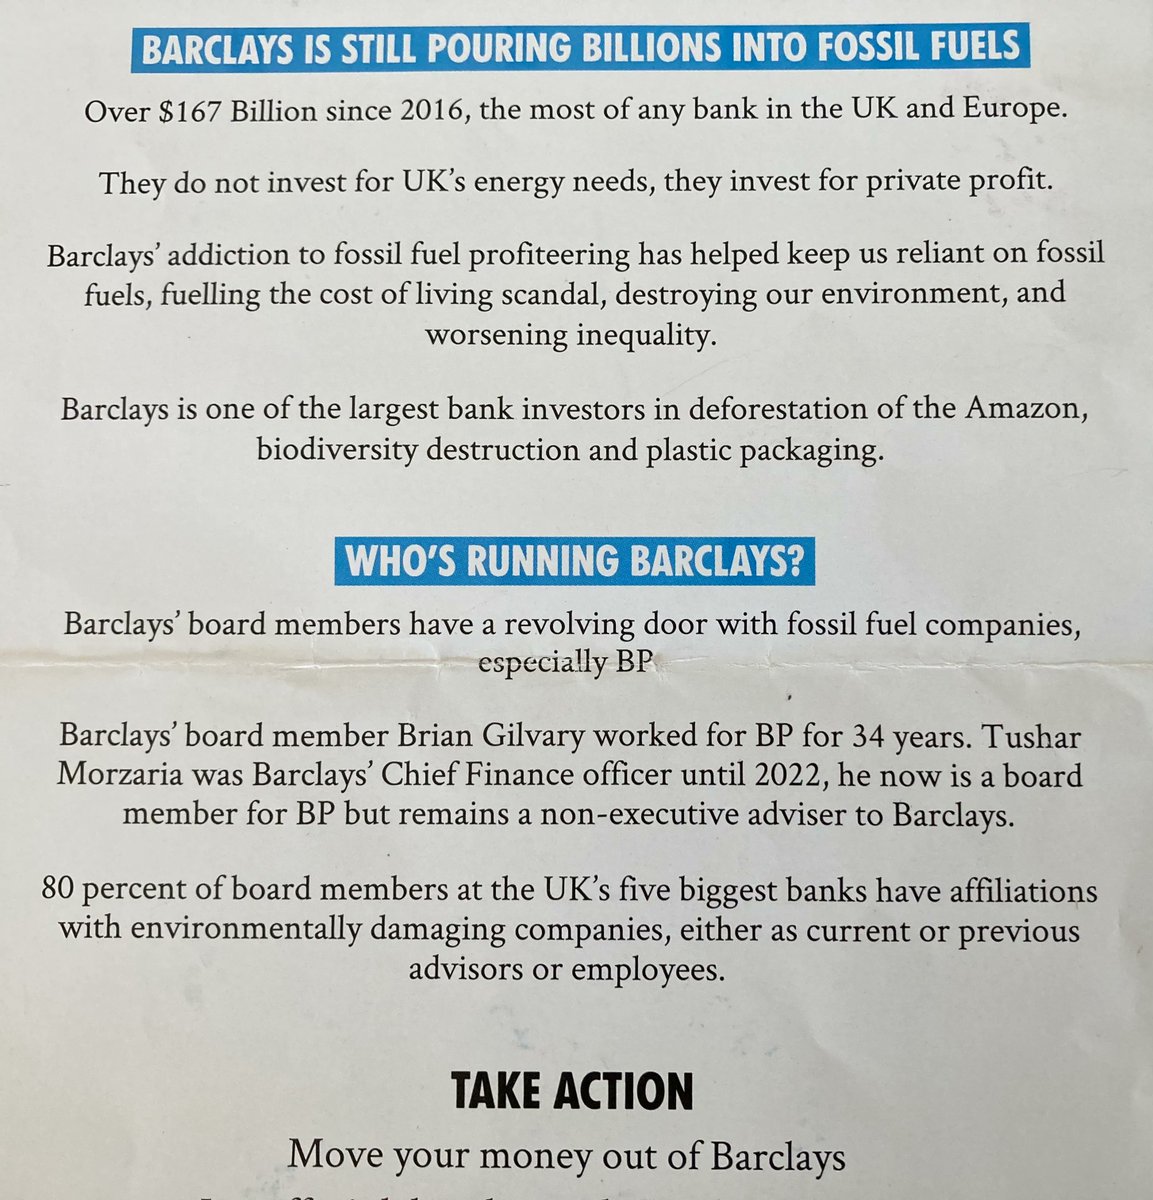 No crystal clear water for your #Paperboat @Barclays. Floating this one in dirty oil for the worst #FossiFuel funders in Europe. 

Is your bank financing #ClimateChaos? Find out: buff.ly/3yFD3rN  

This paperboat makes good use of an old #BetterWithoutBarclays leaflet.